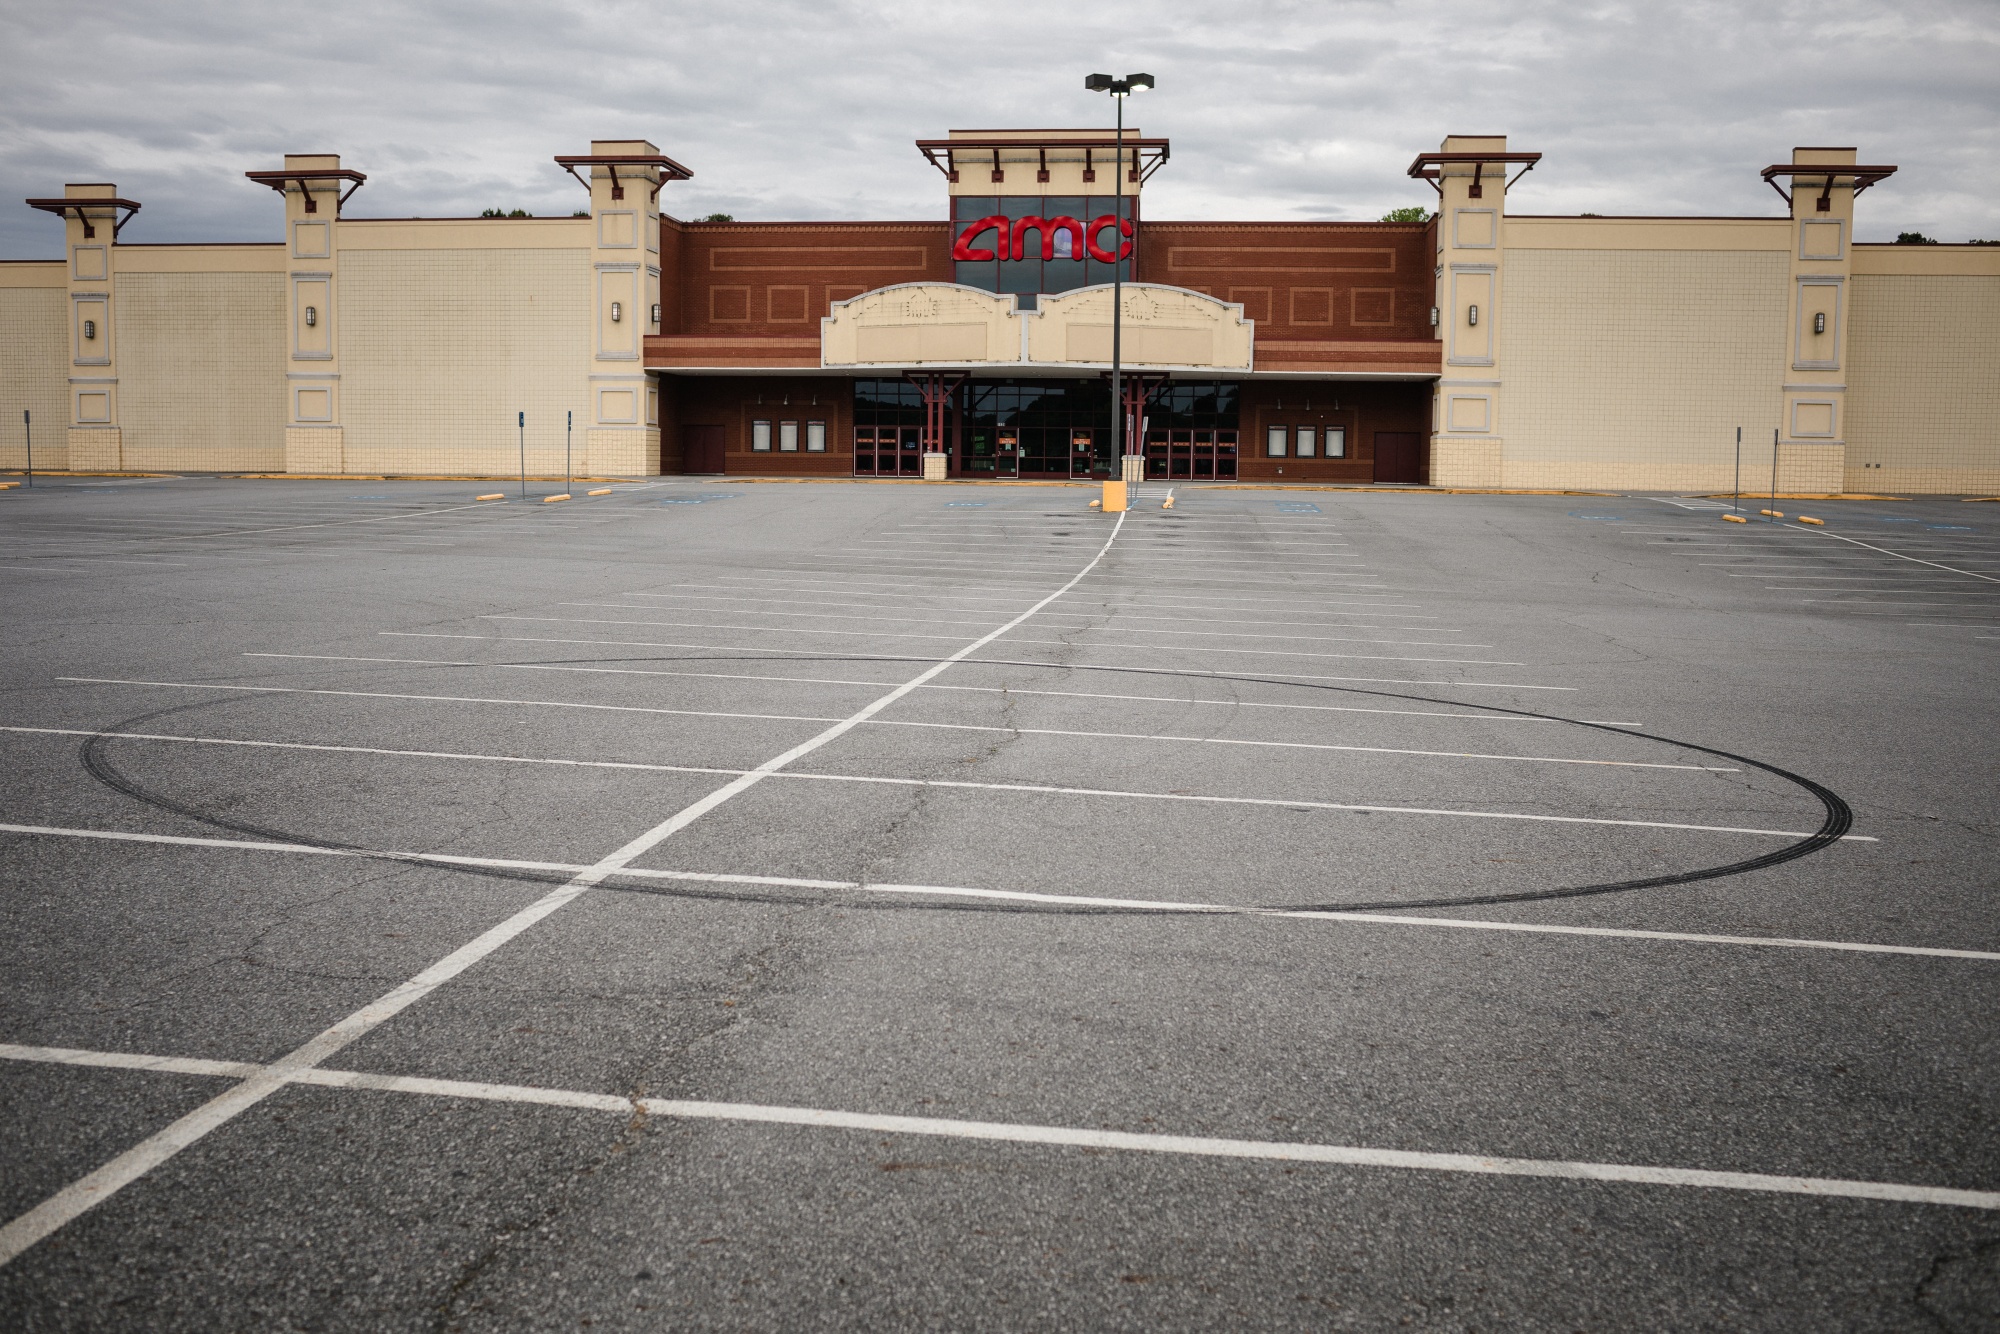 Temporarily shuttered by the&nbsp;pandemic, many movie theaters are facing the possibility of permanent closures. What then?&nbsp;